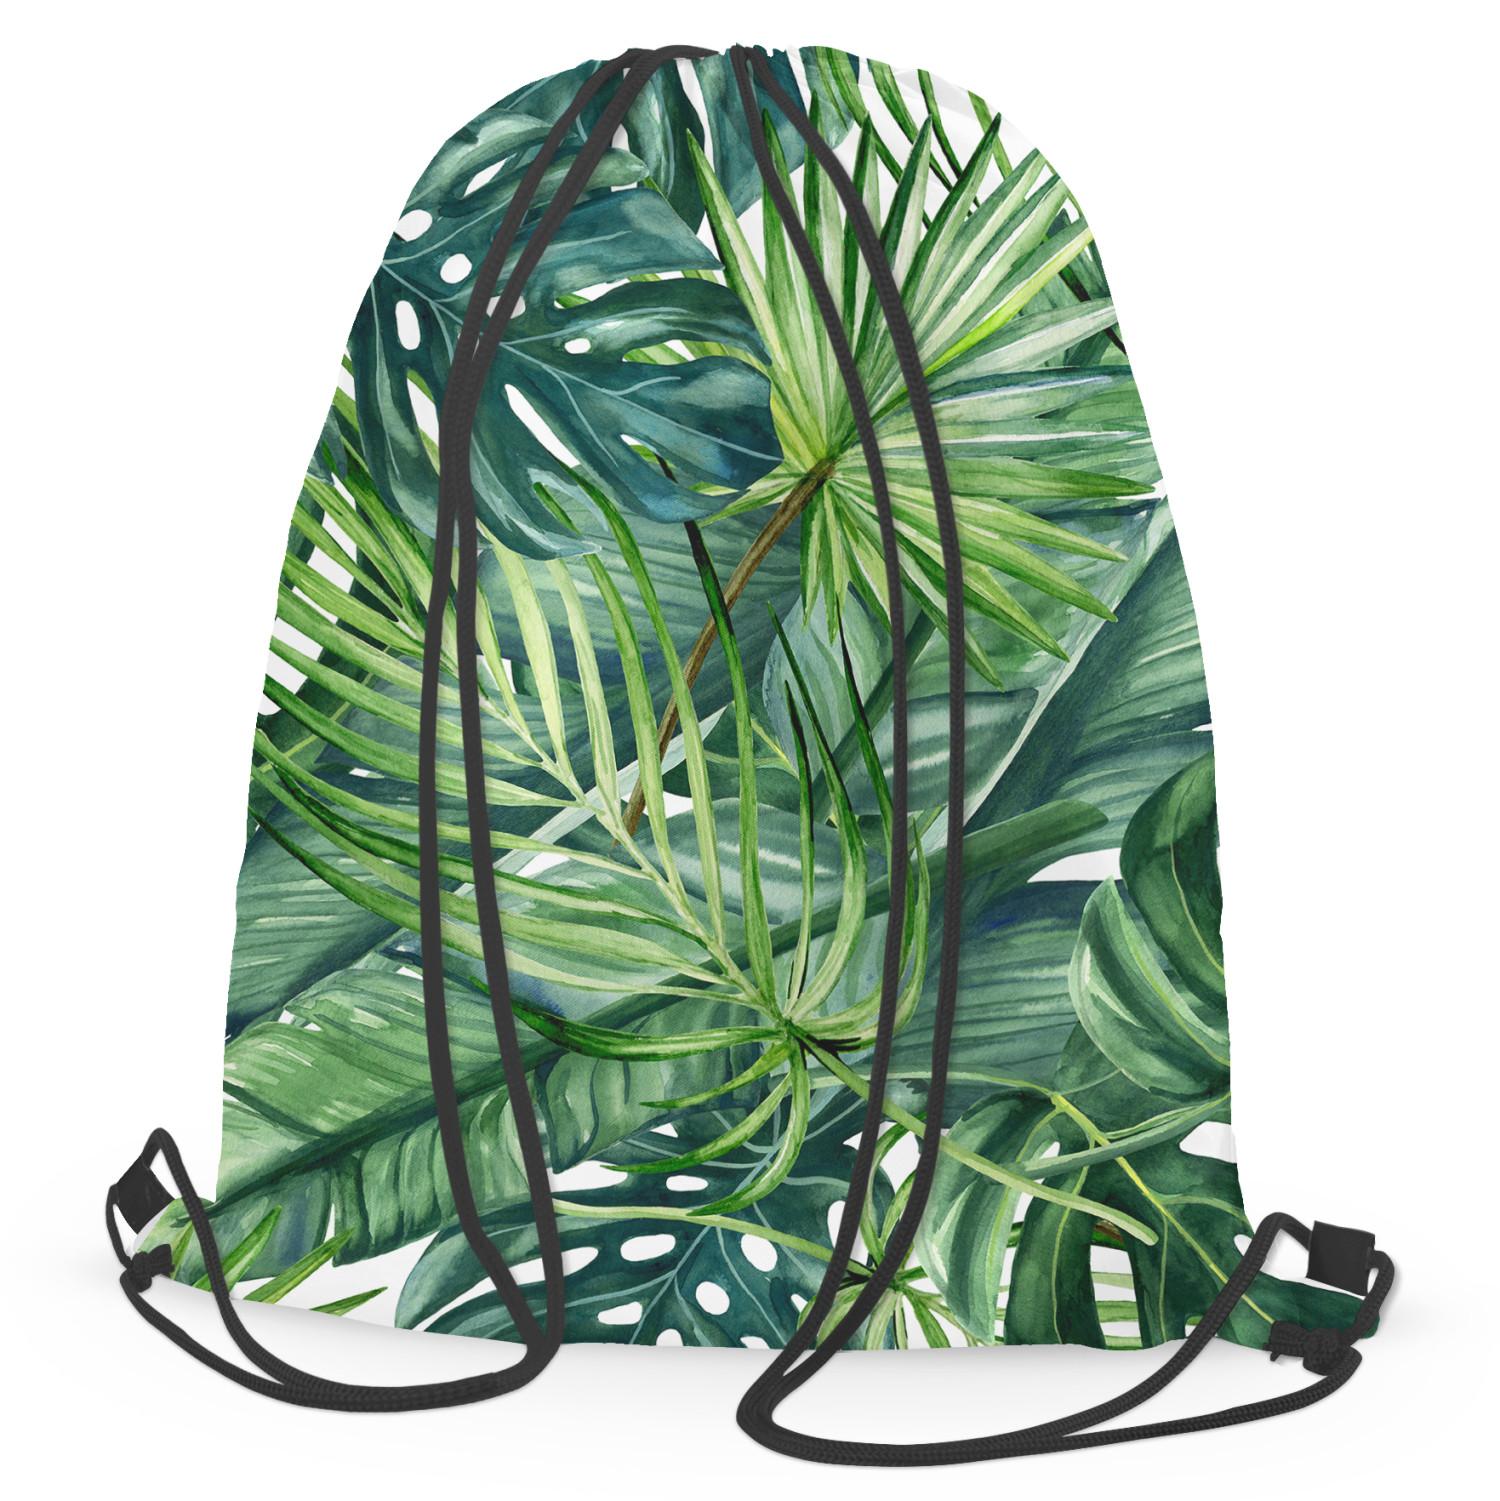 Mochila Green corner - leaves of various shapes, shown on a white background